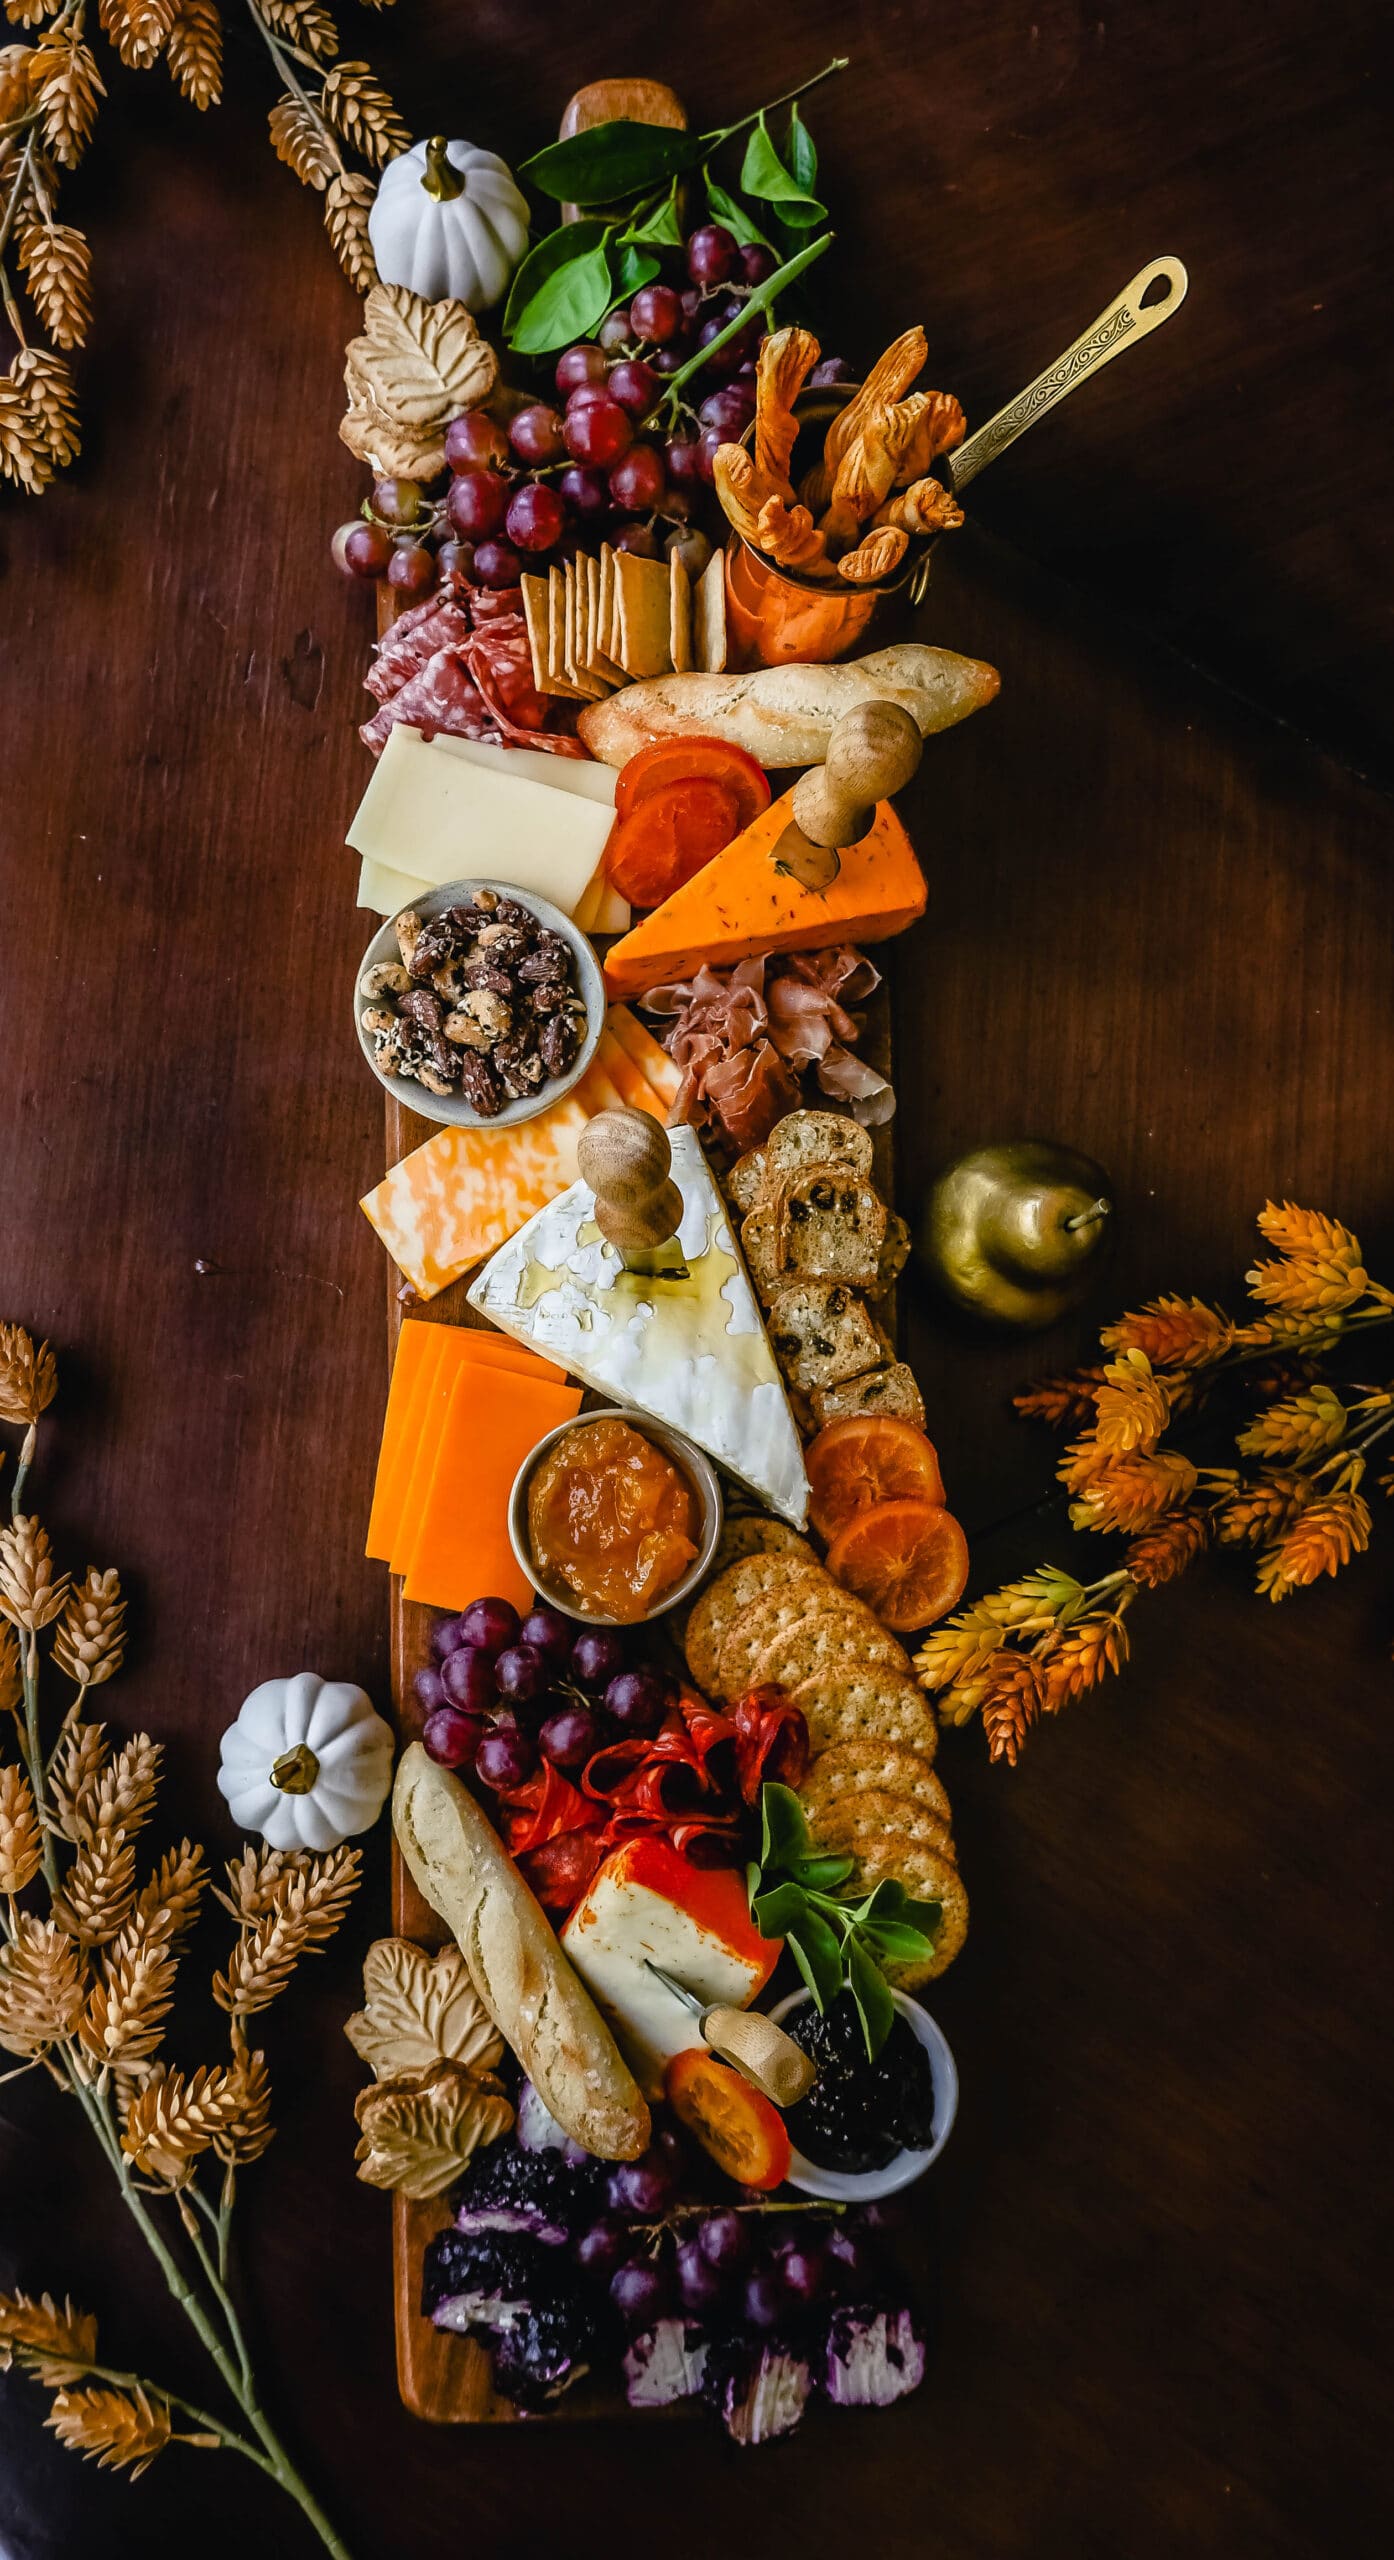 How to Make a Cheese Board - The Art of Food and Wine